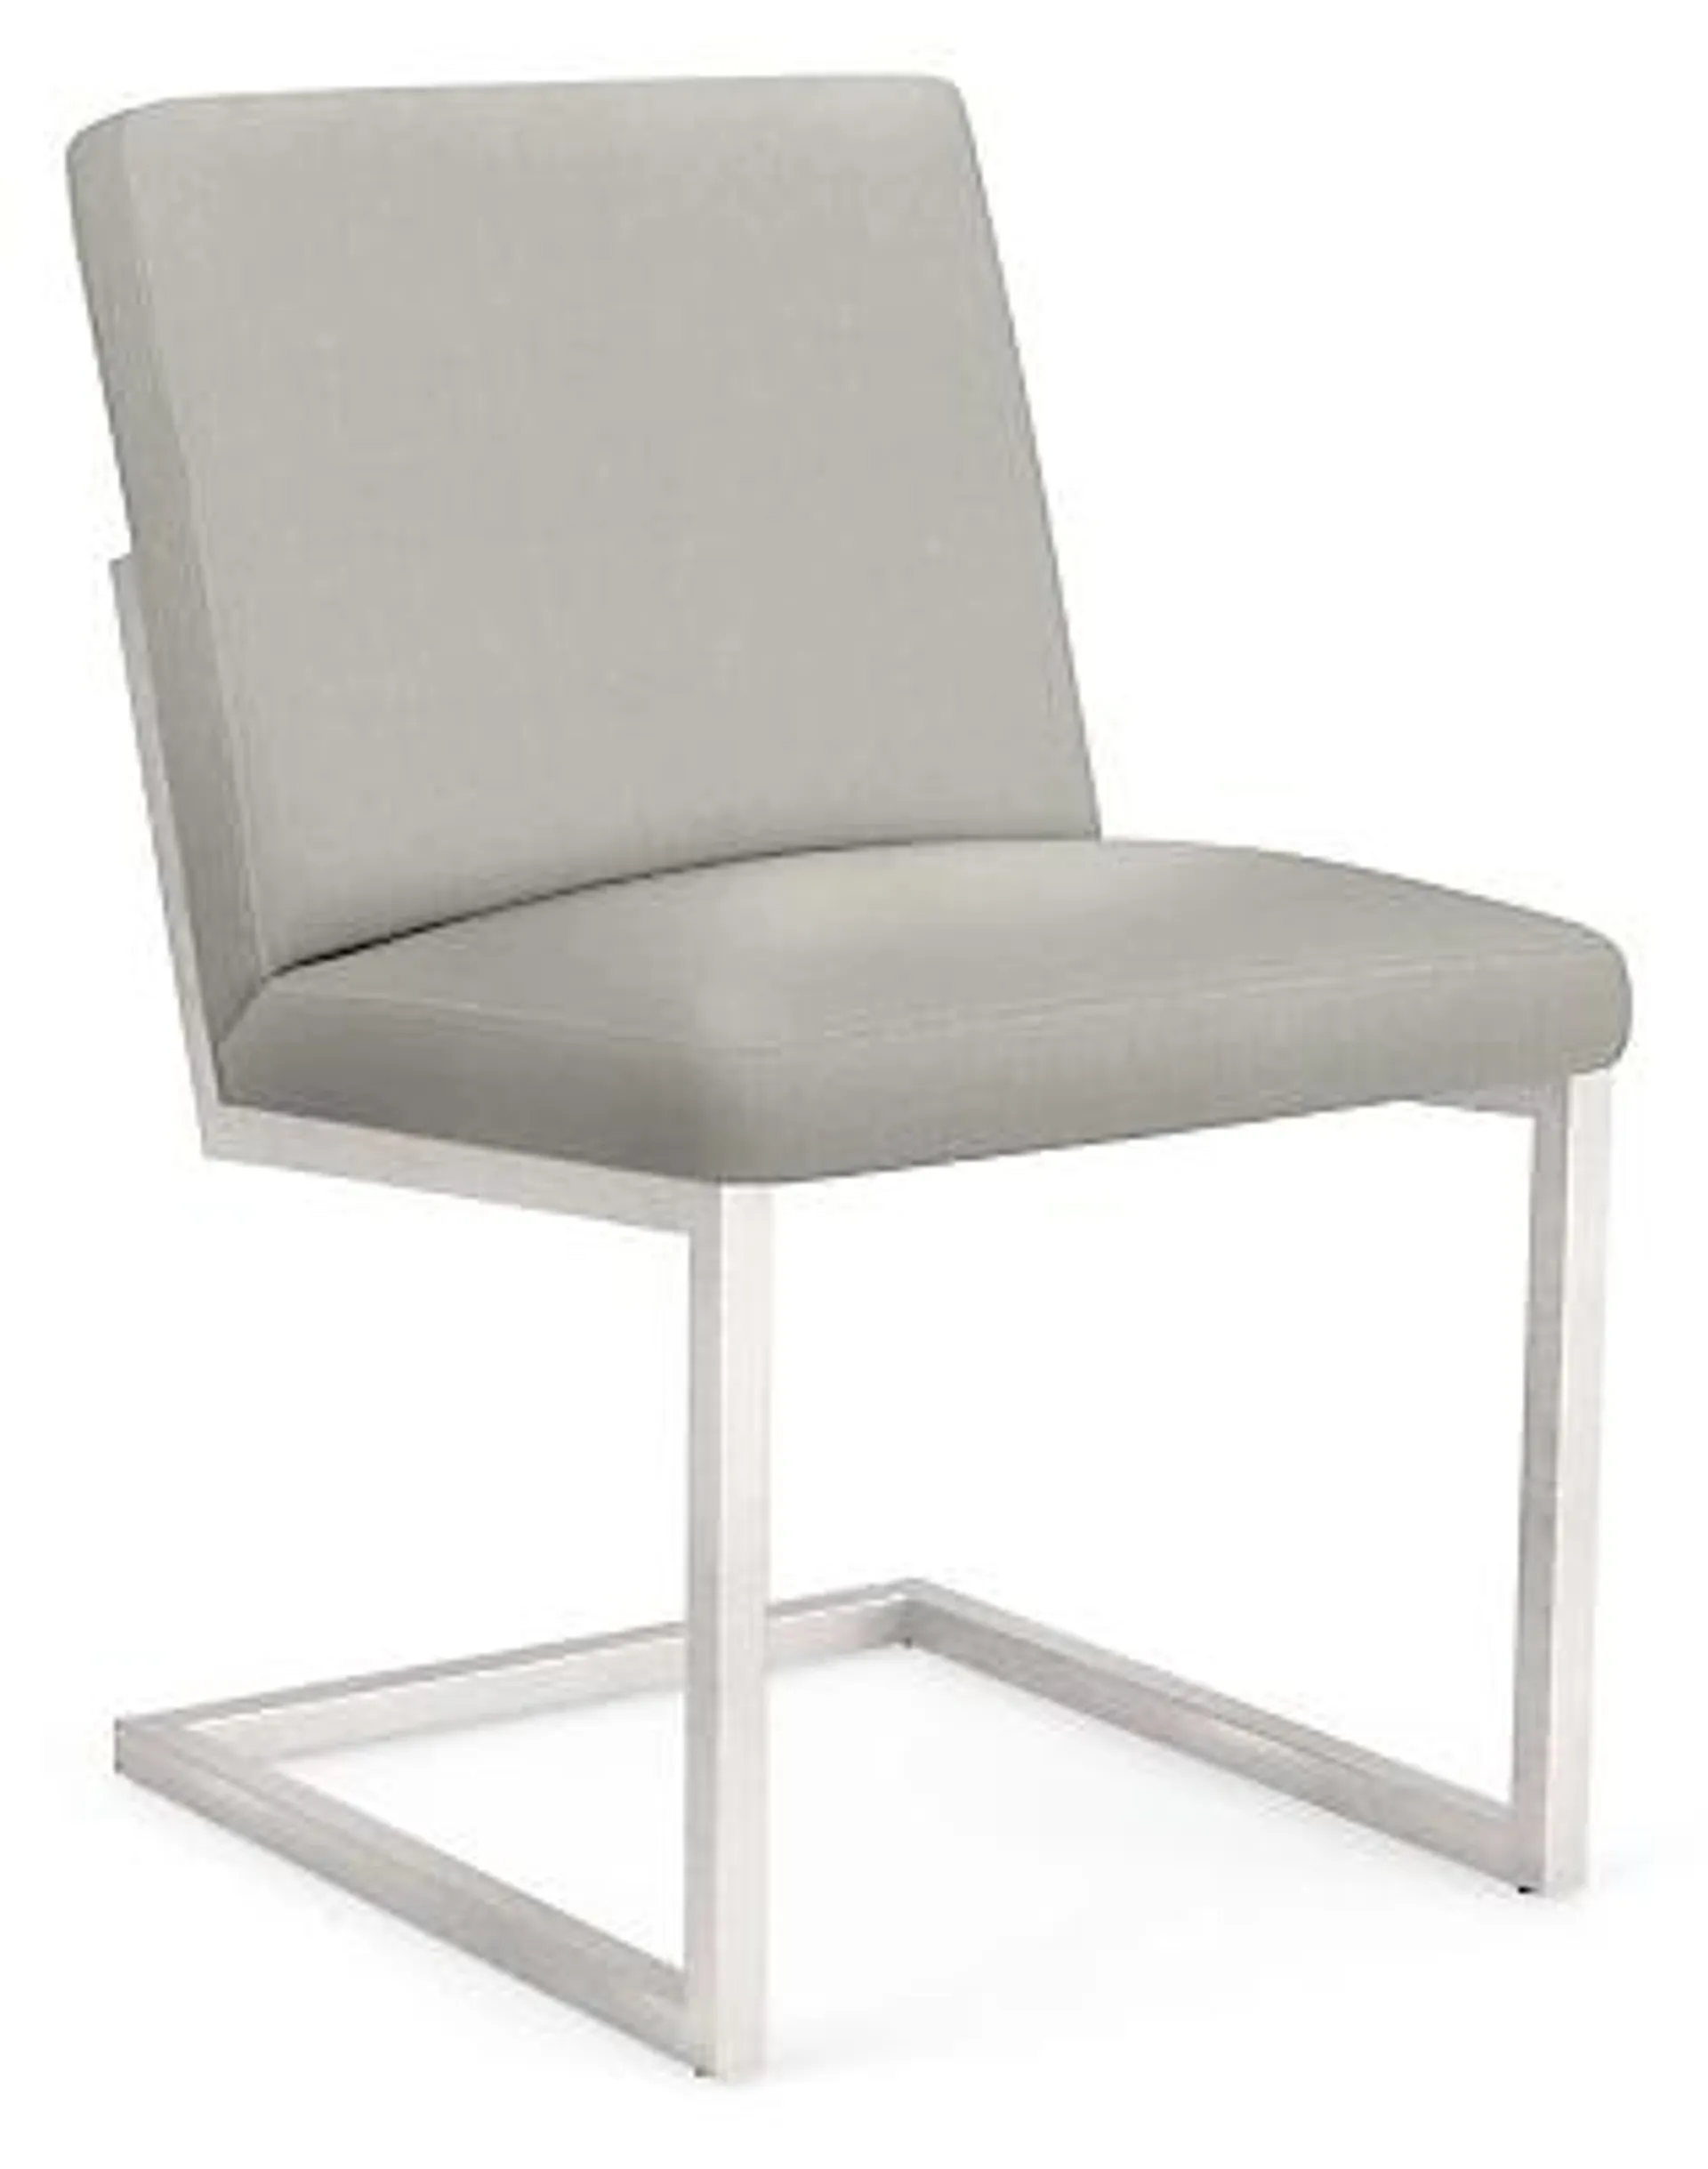 Finn Side Chair in Mist Grey with Stainless Steel Frame